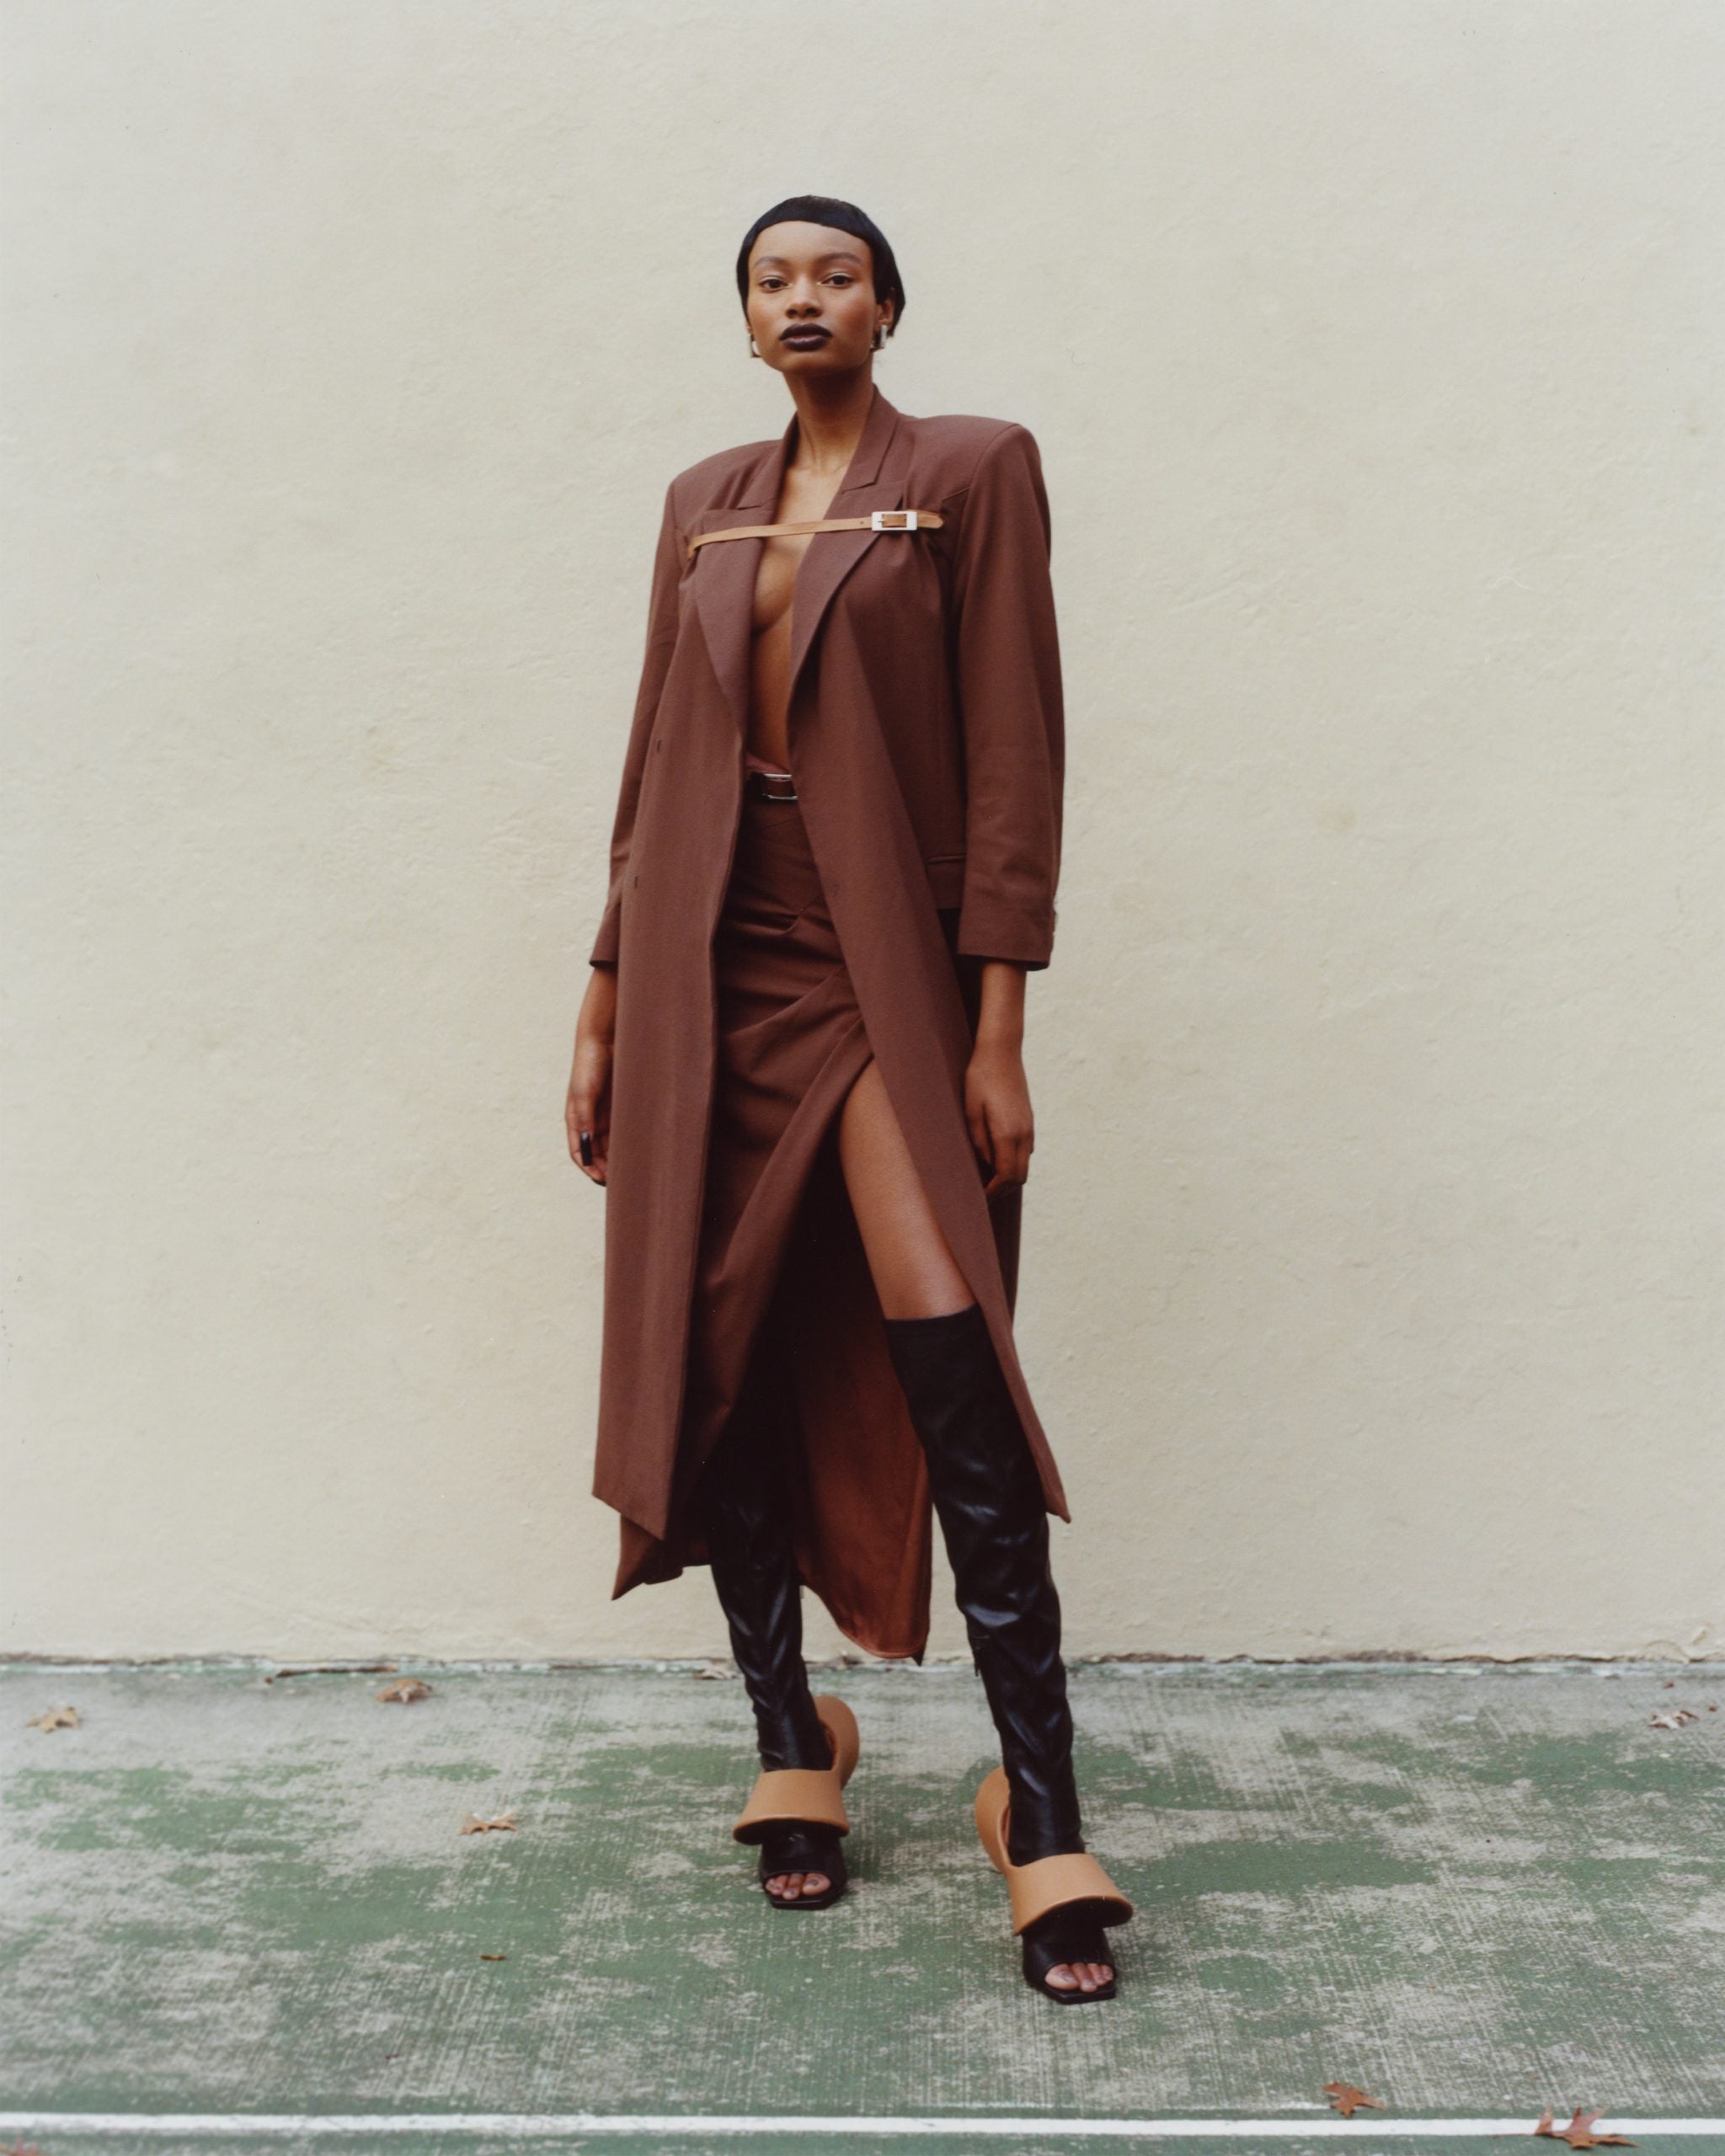 Black Fashion Fair Gathers Black Fashion Talent To Release Its First Publication